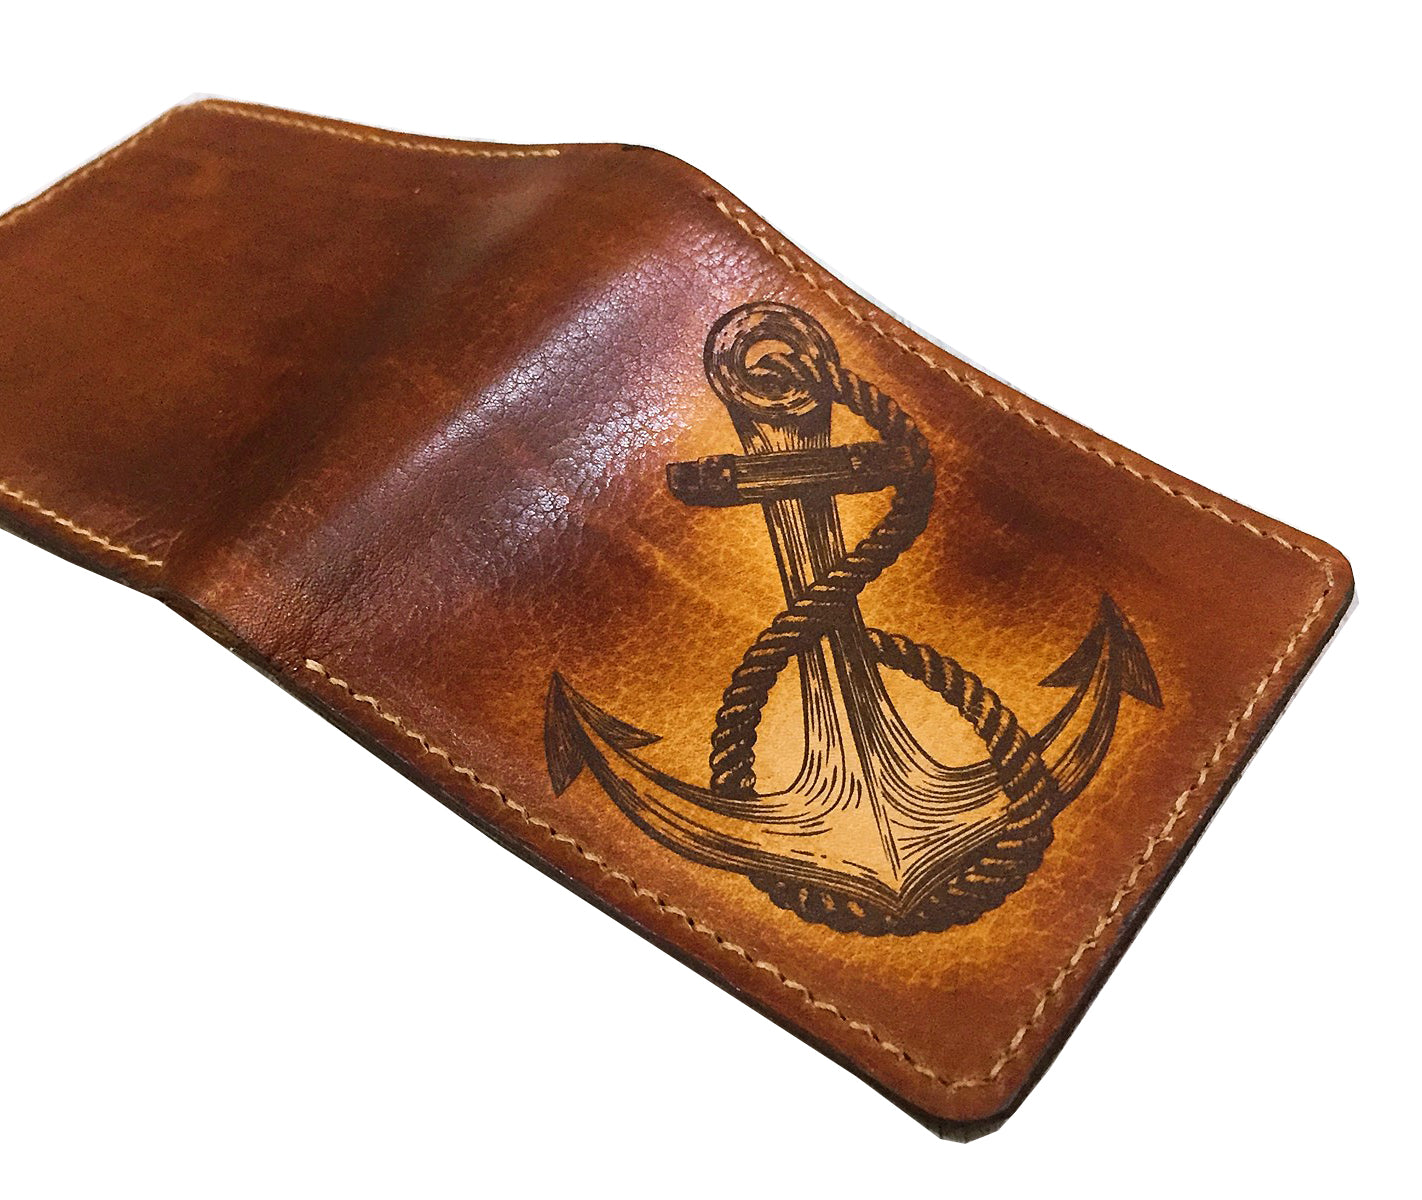 Mayan Corner - Anchor leather handmade men's wallet, custom gifts for him, father's day gifts, anniversary gift for men